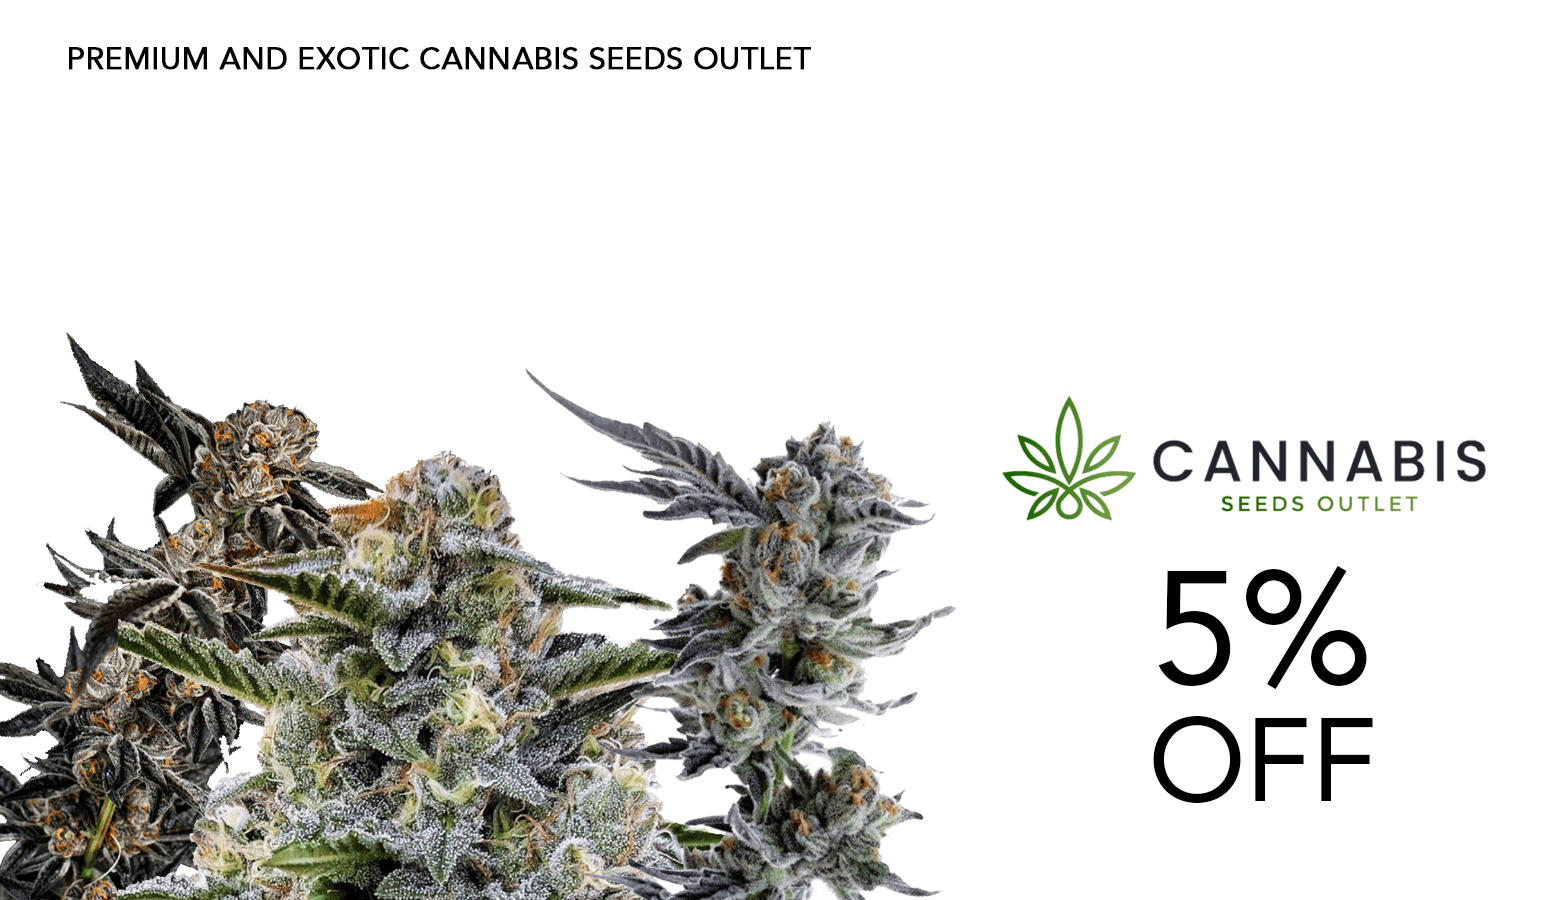 Cannabis Seeds Outlet Coupon Code - Save On Cannabis